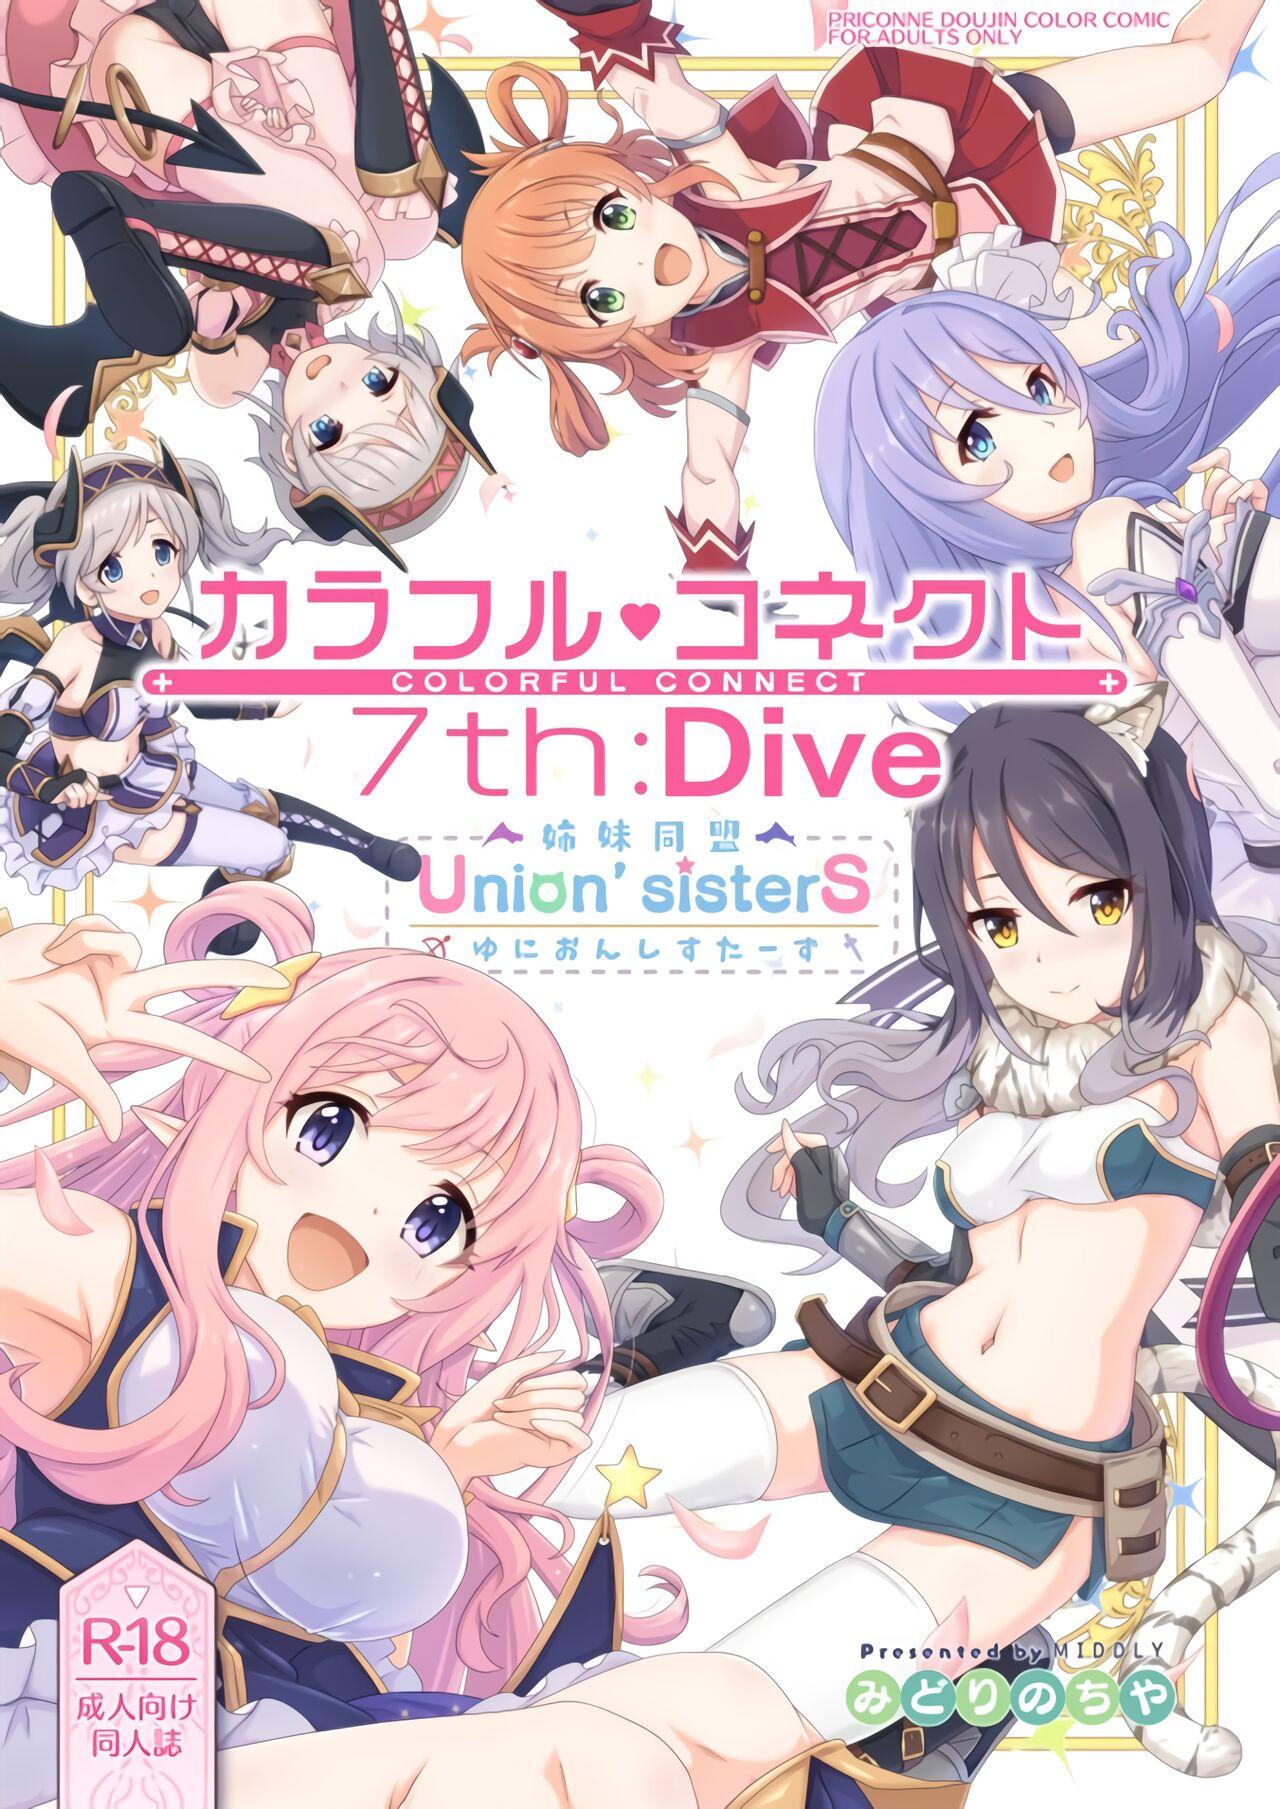 Colorful Connect 7th:Dive - Union Sisters 0